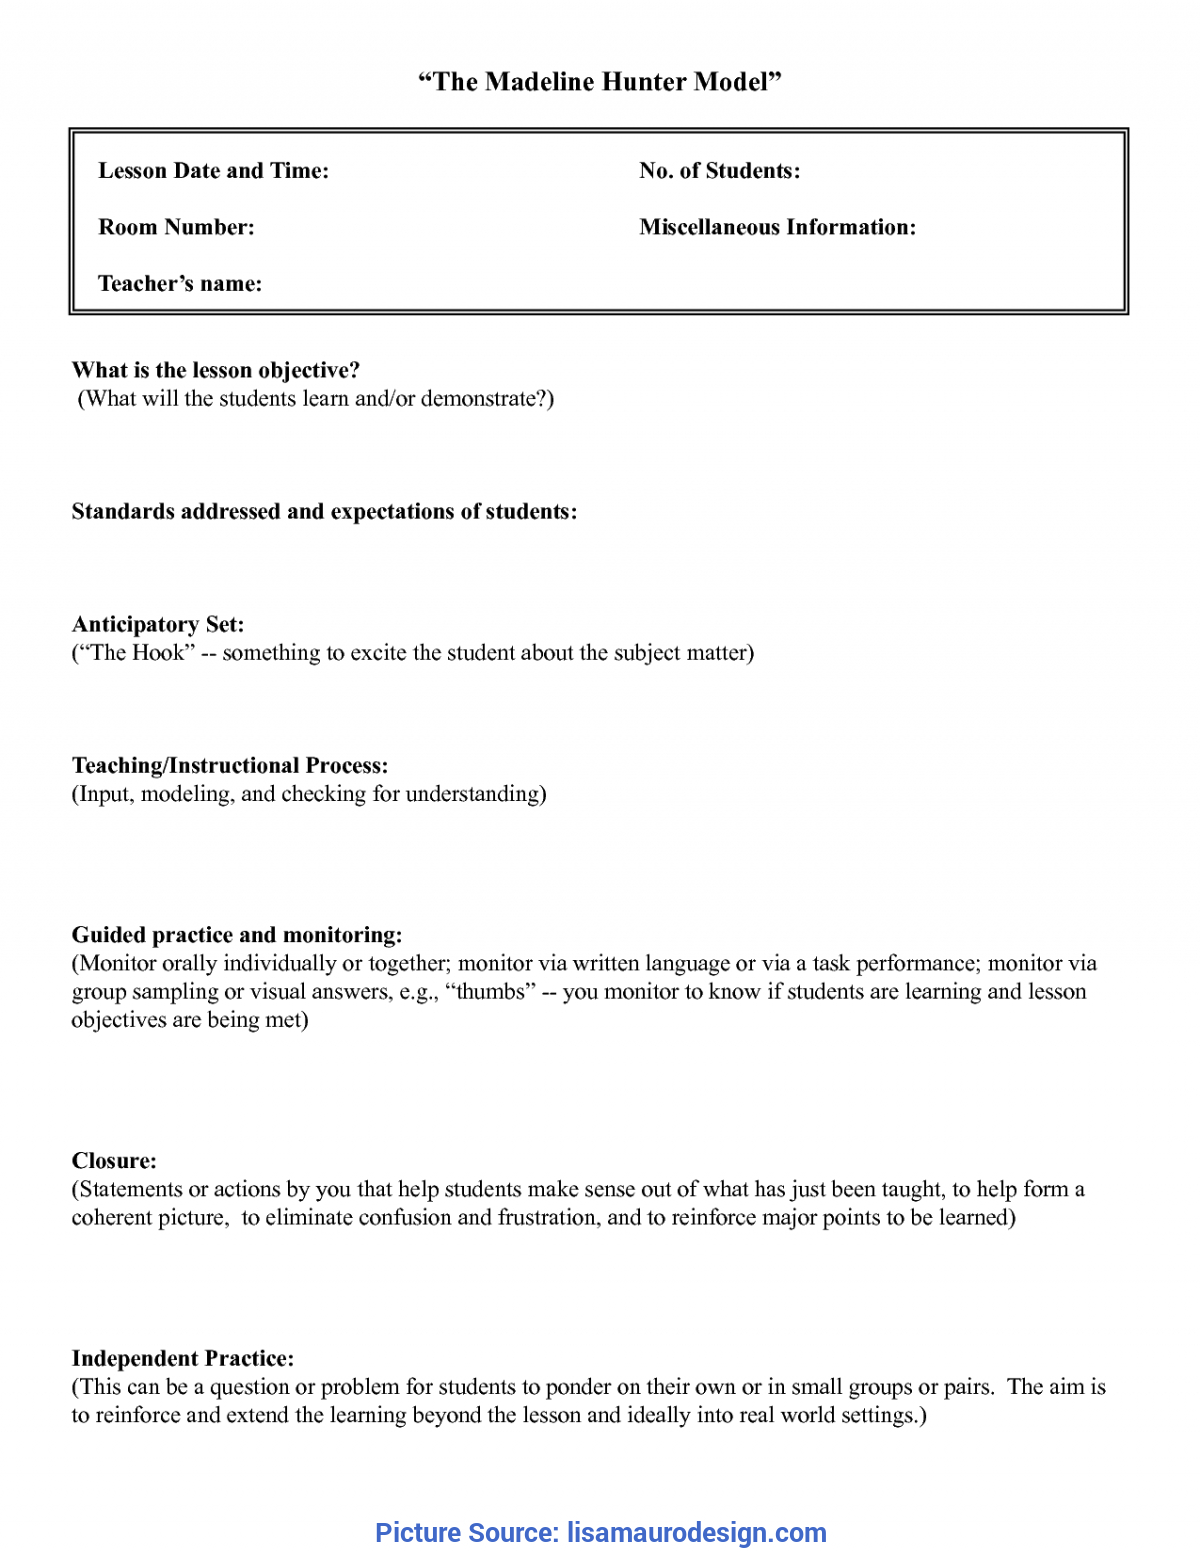 Best Lesson Plan Template Anticipatory Set Madeline Hunter Pertaining To Madeline Hunter Lesson Plan Blank Template